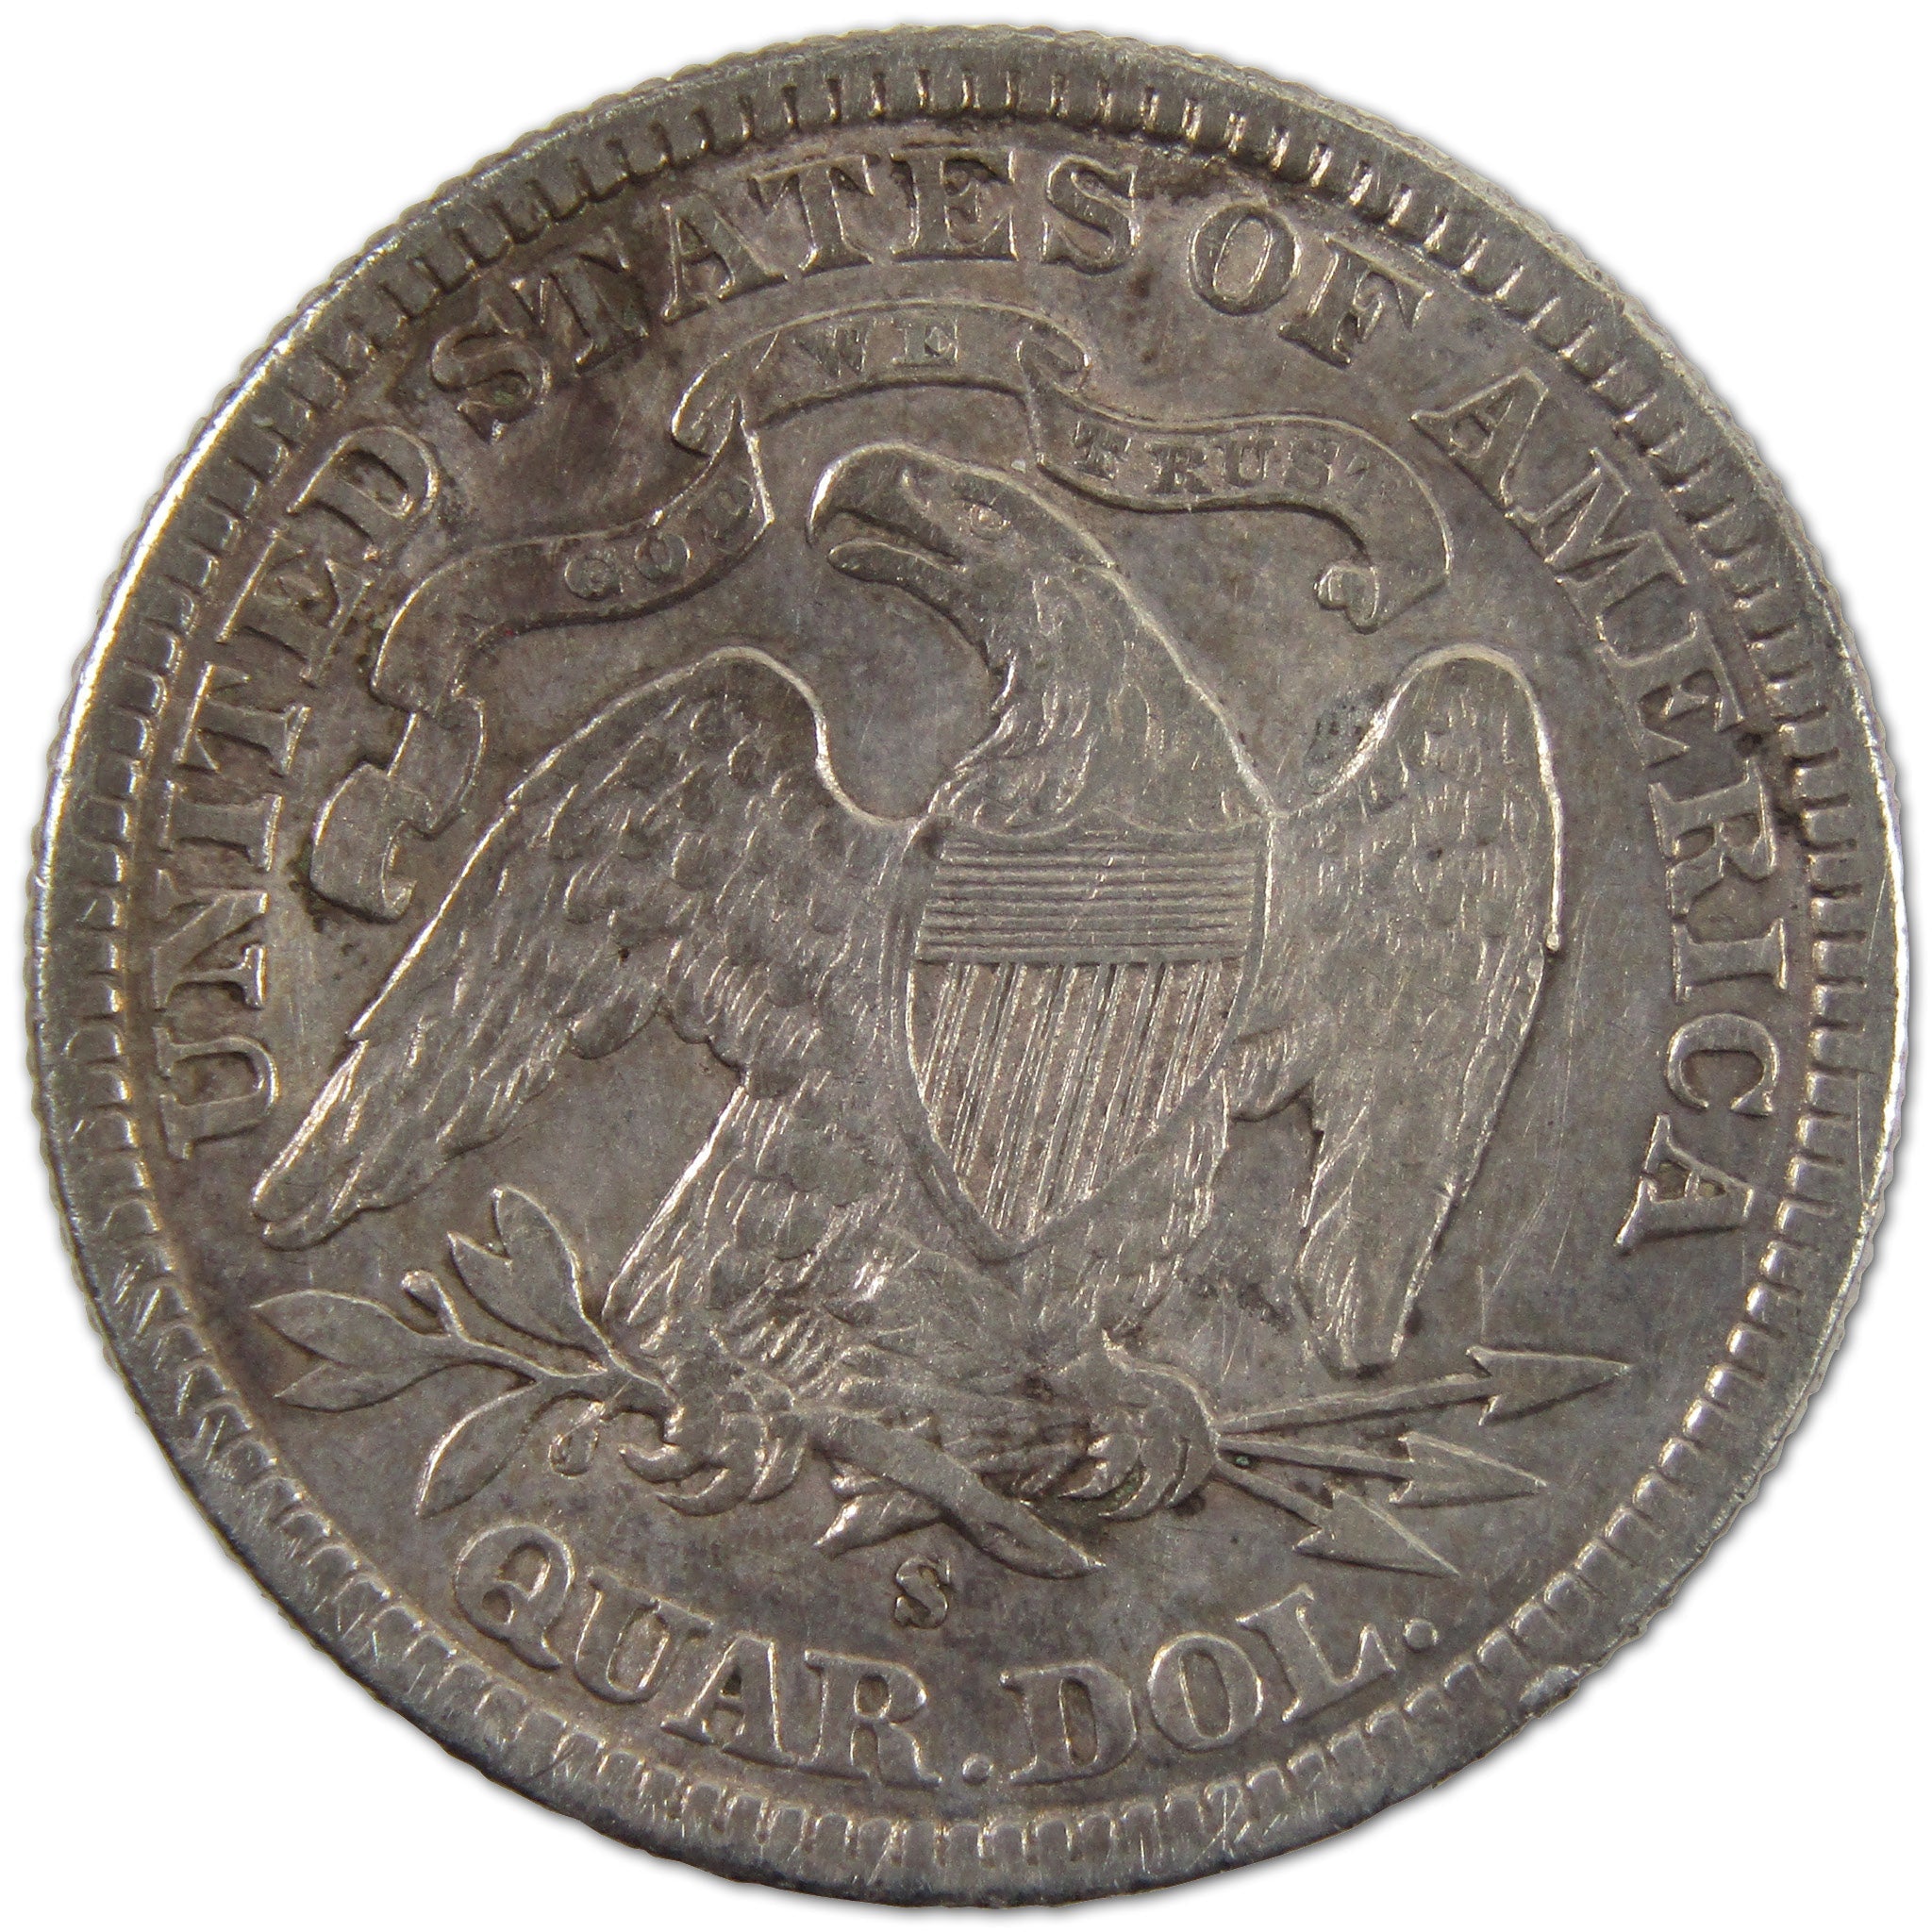 1891 S Seated Liberty Quarter XF EF Extremely Fine Silver SKU:I10564